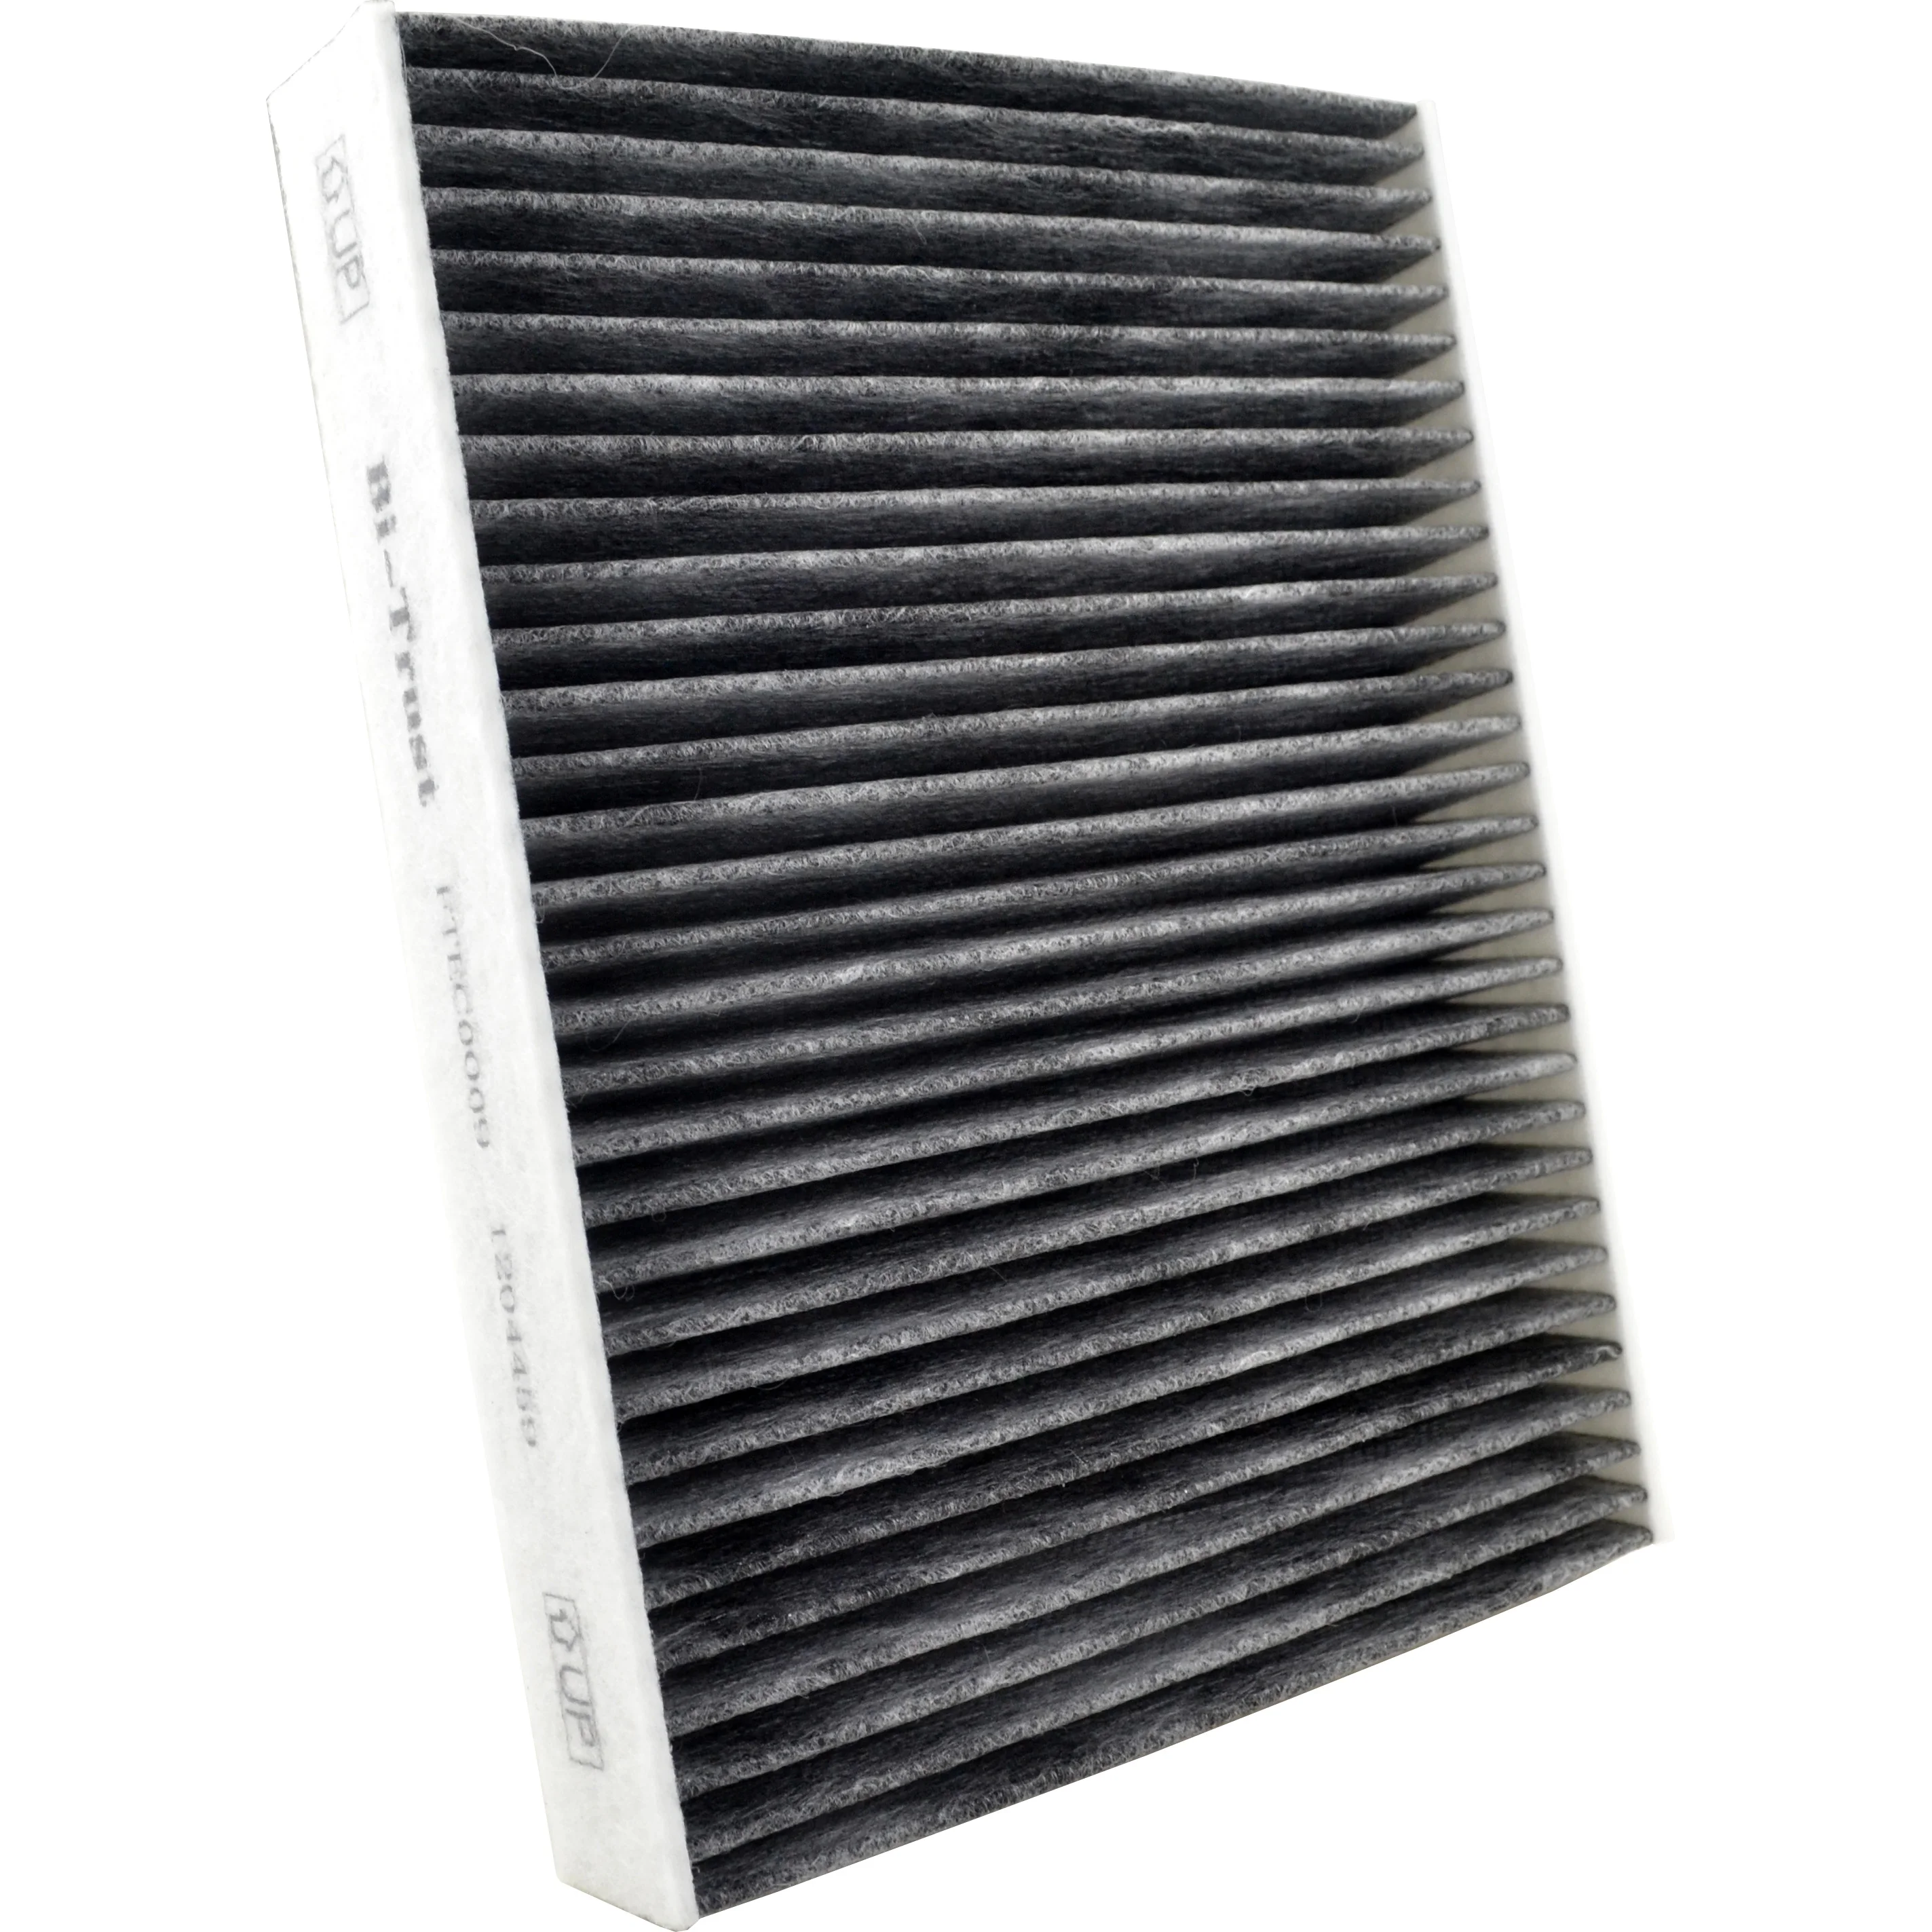 Jh_,Jd_ Fusion 1204459 Cabin Air Filter for Ford Fiesta V Ju_